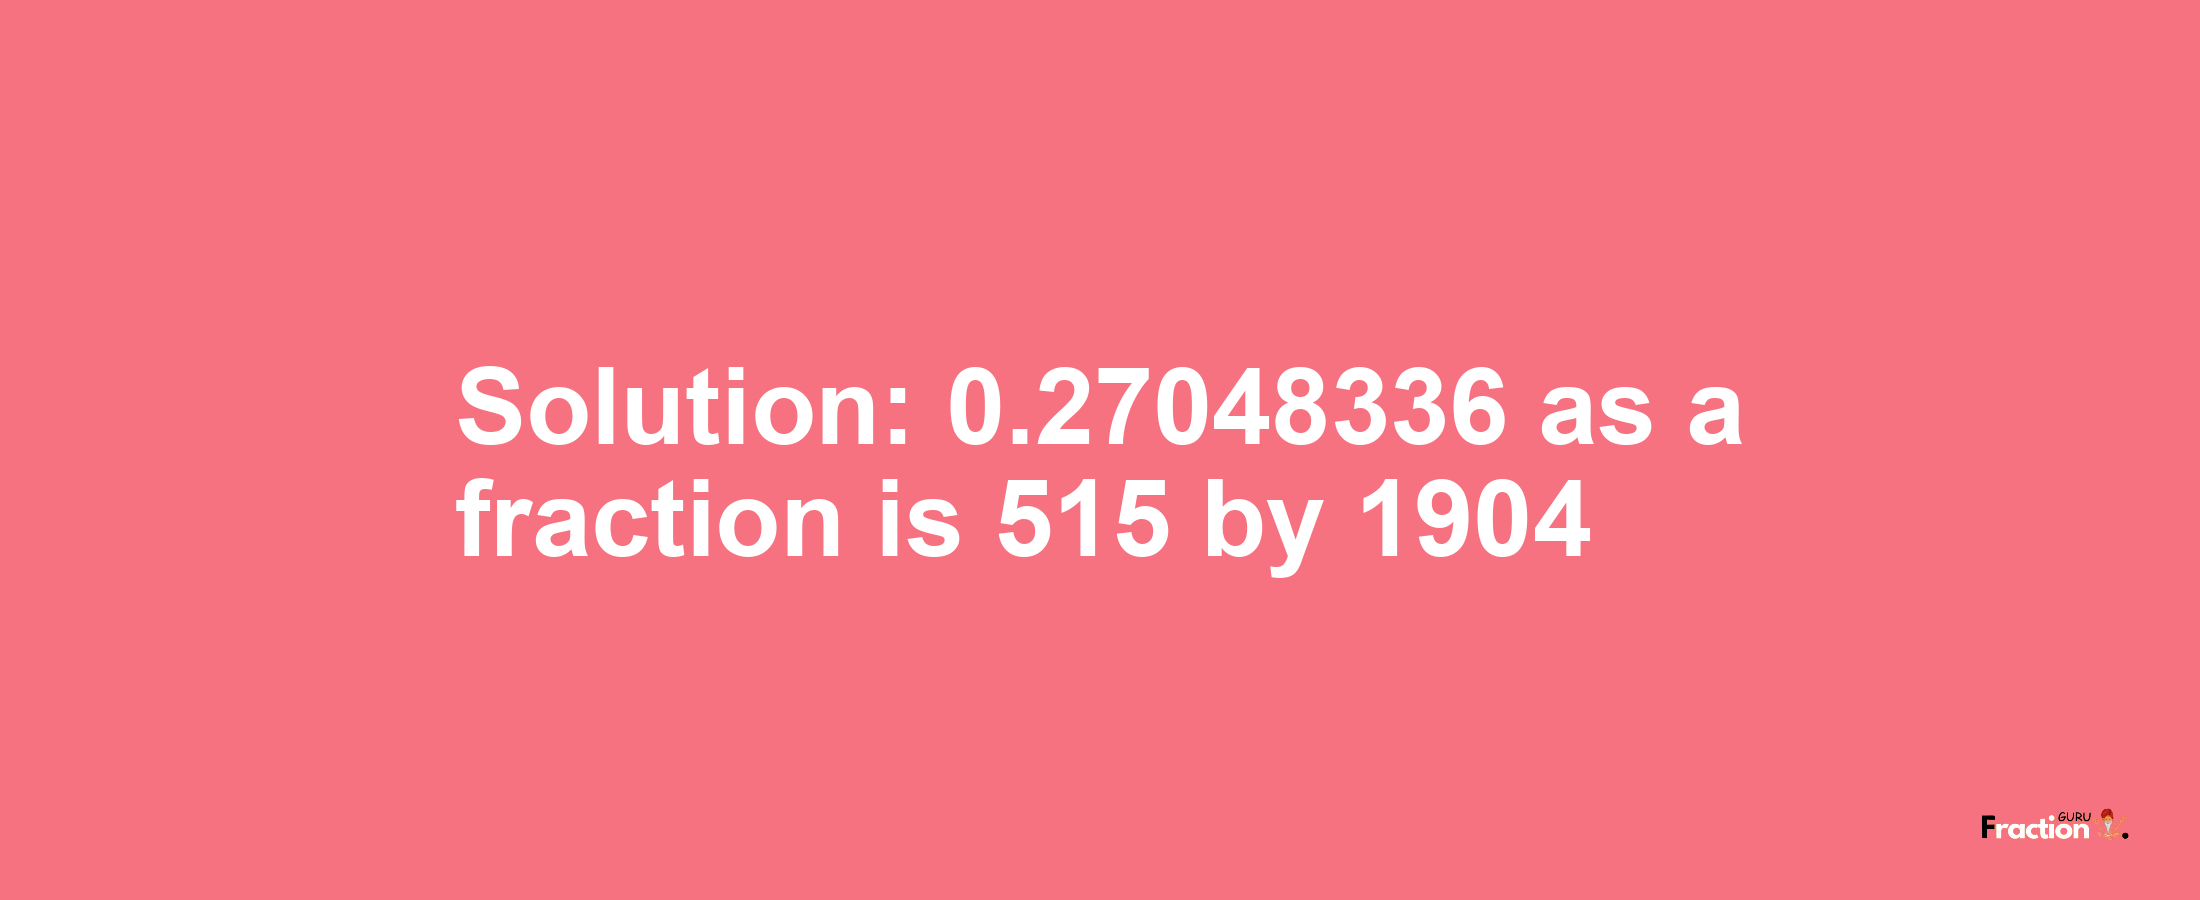 Solution:0.27048336 as a fraction is 515/1904